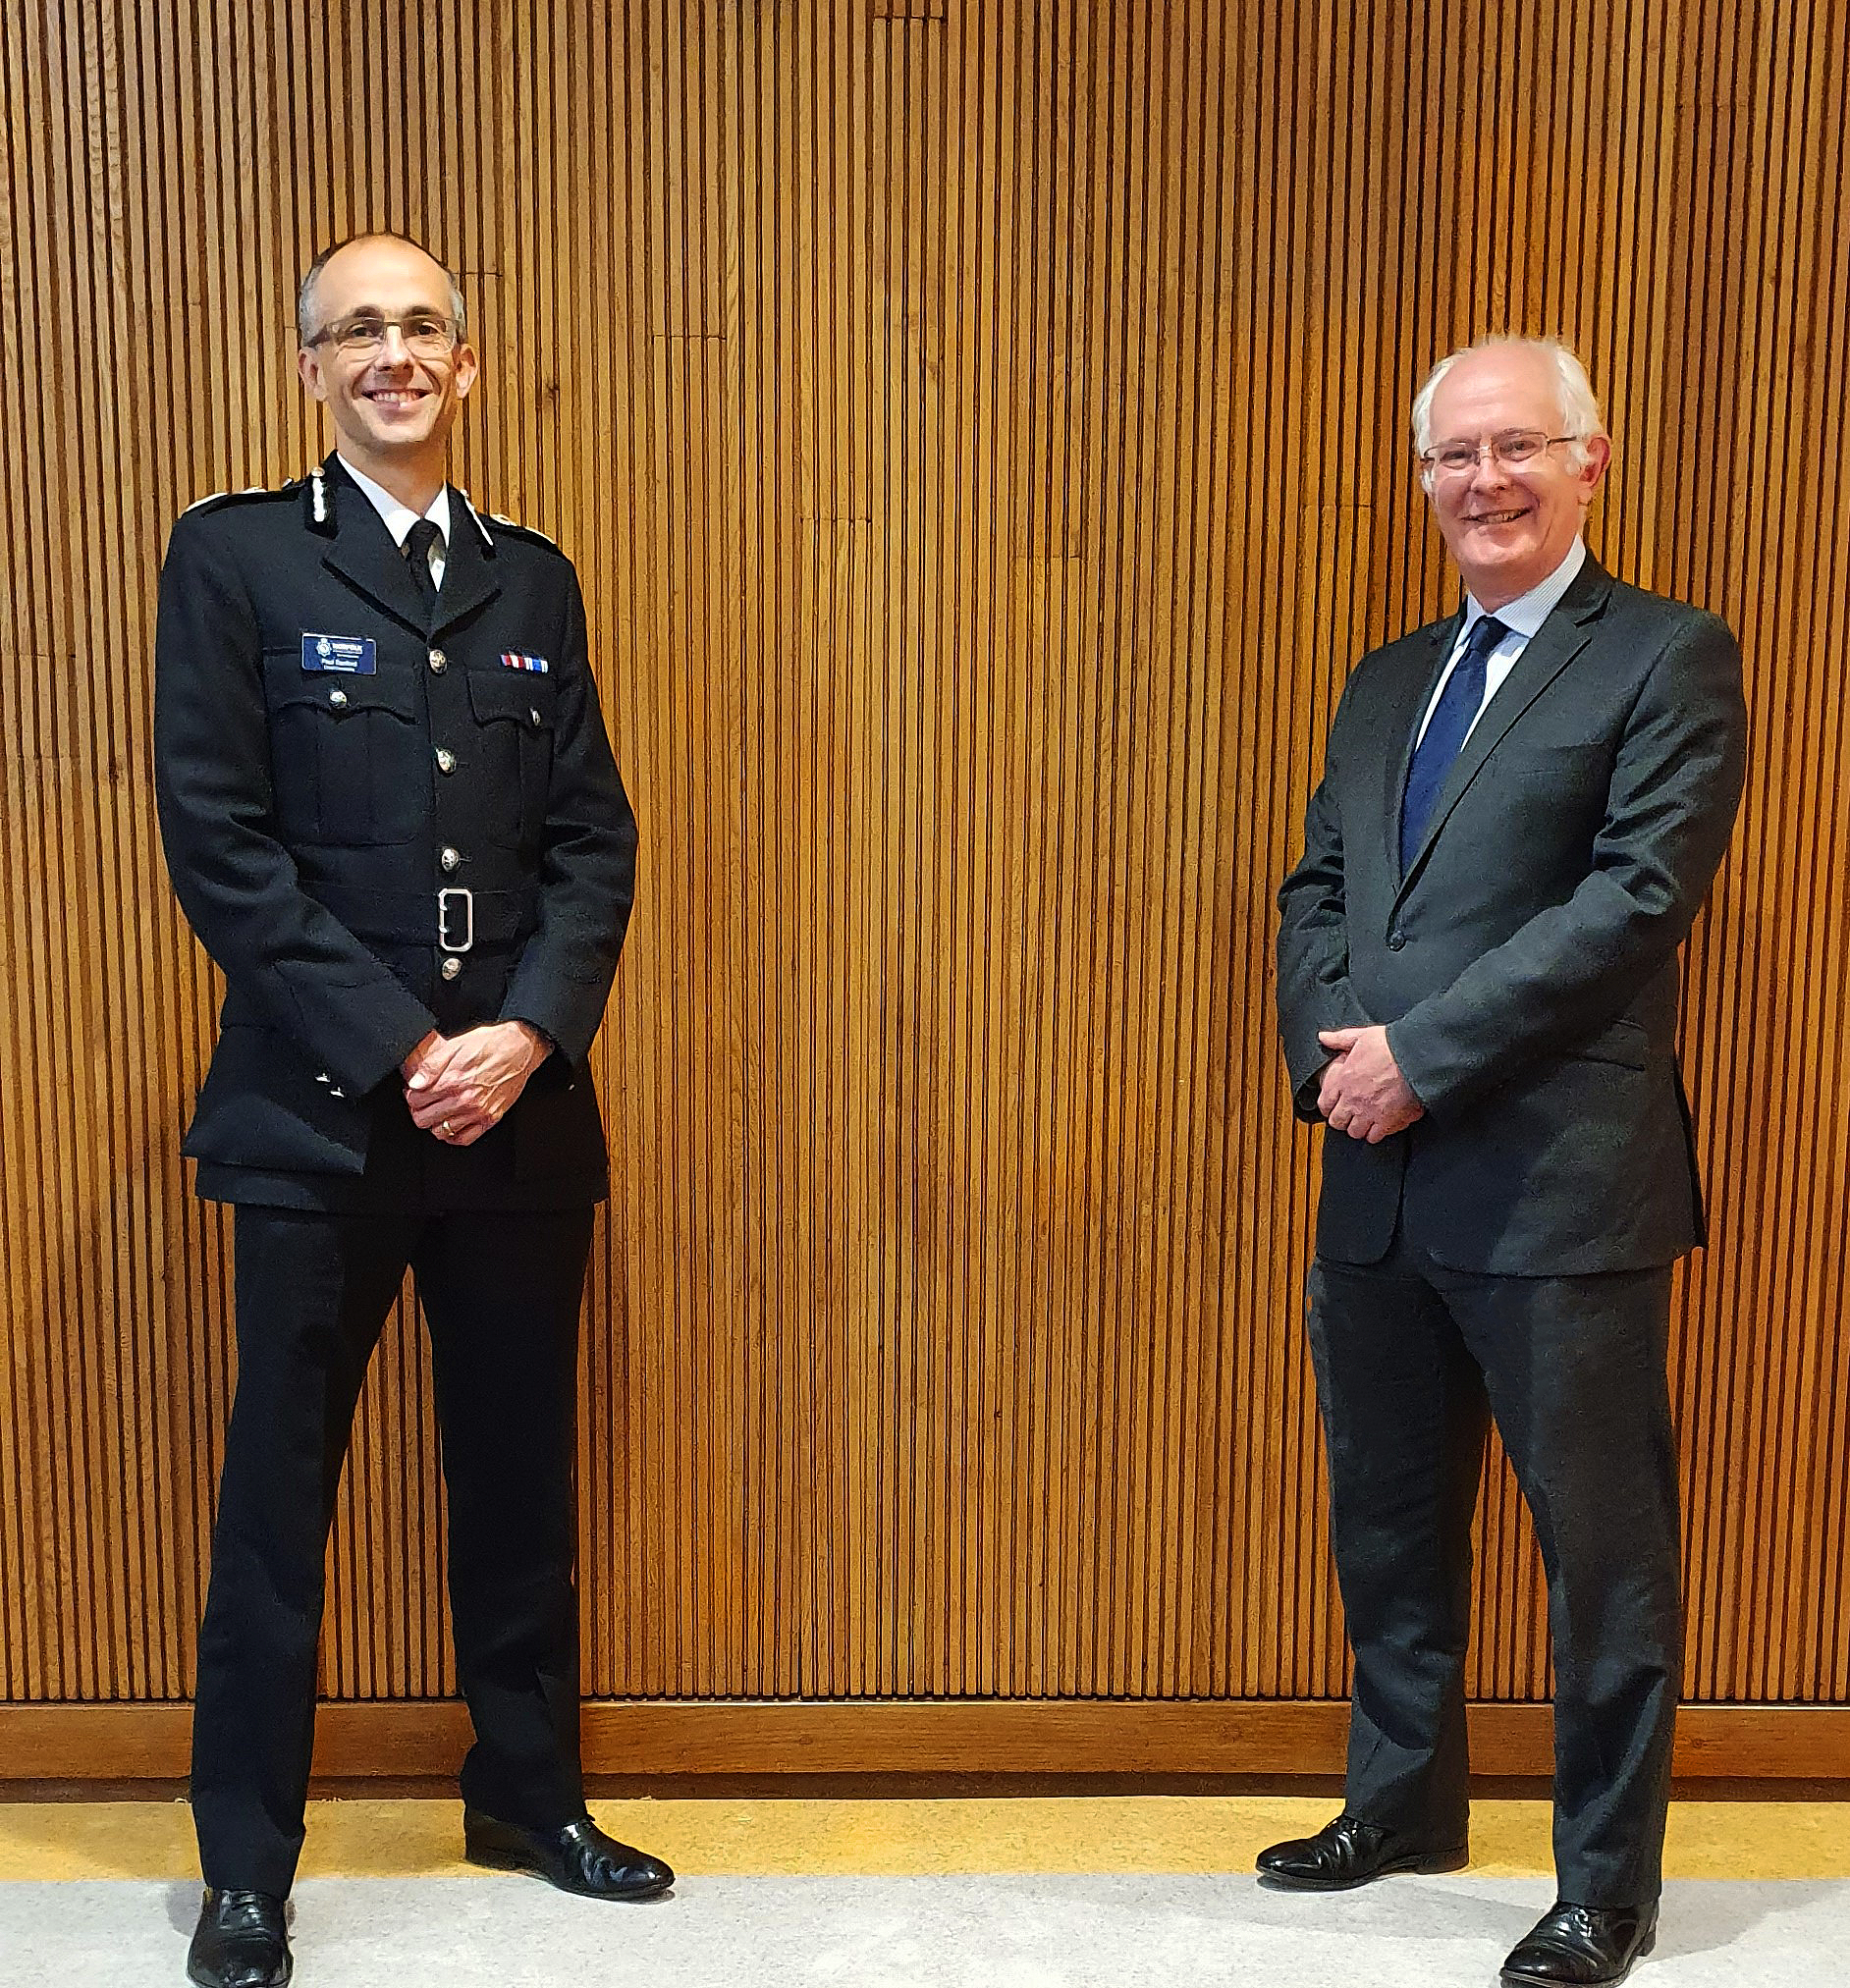 Photo shows Chief Constable Paul Sanford and PCC Giles Orpen-Smellie at County Hall, Norfolk